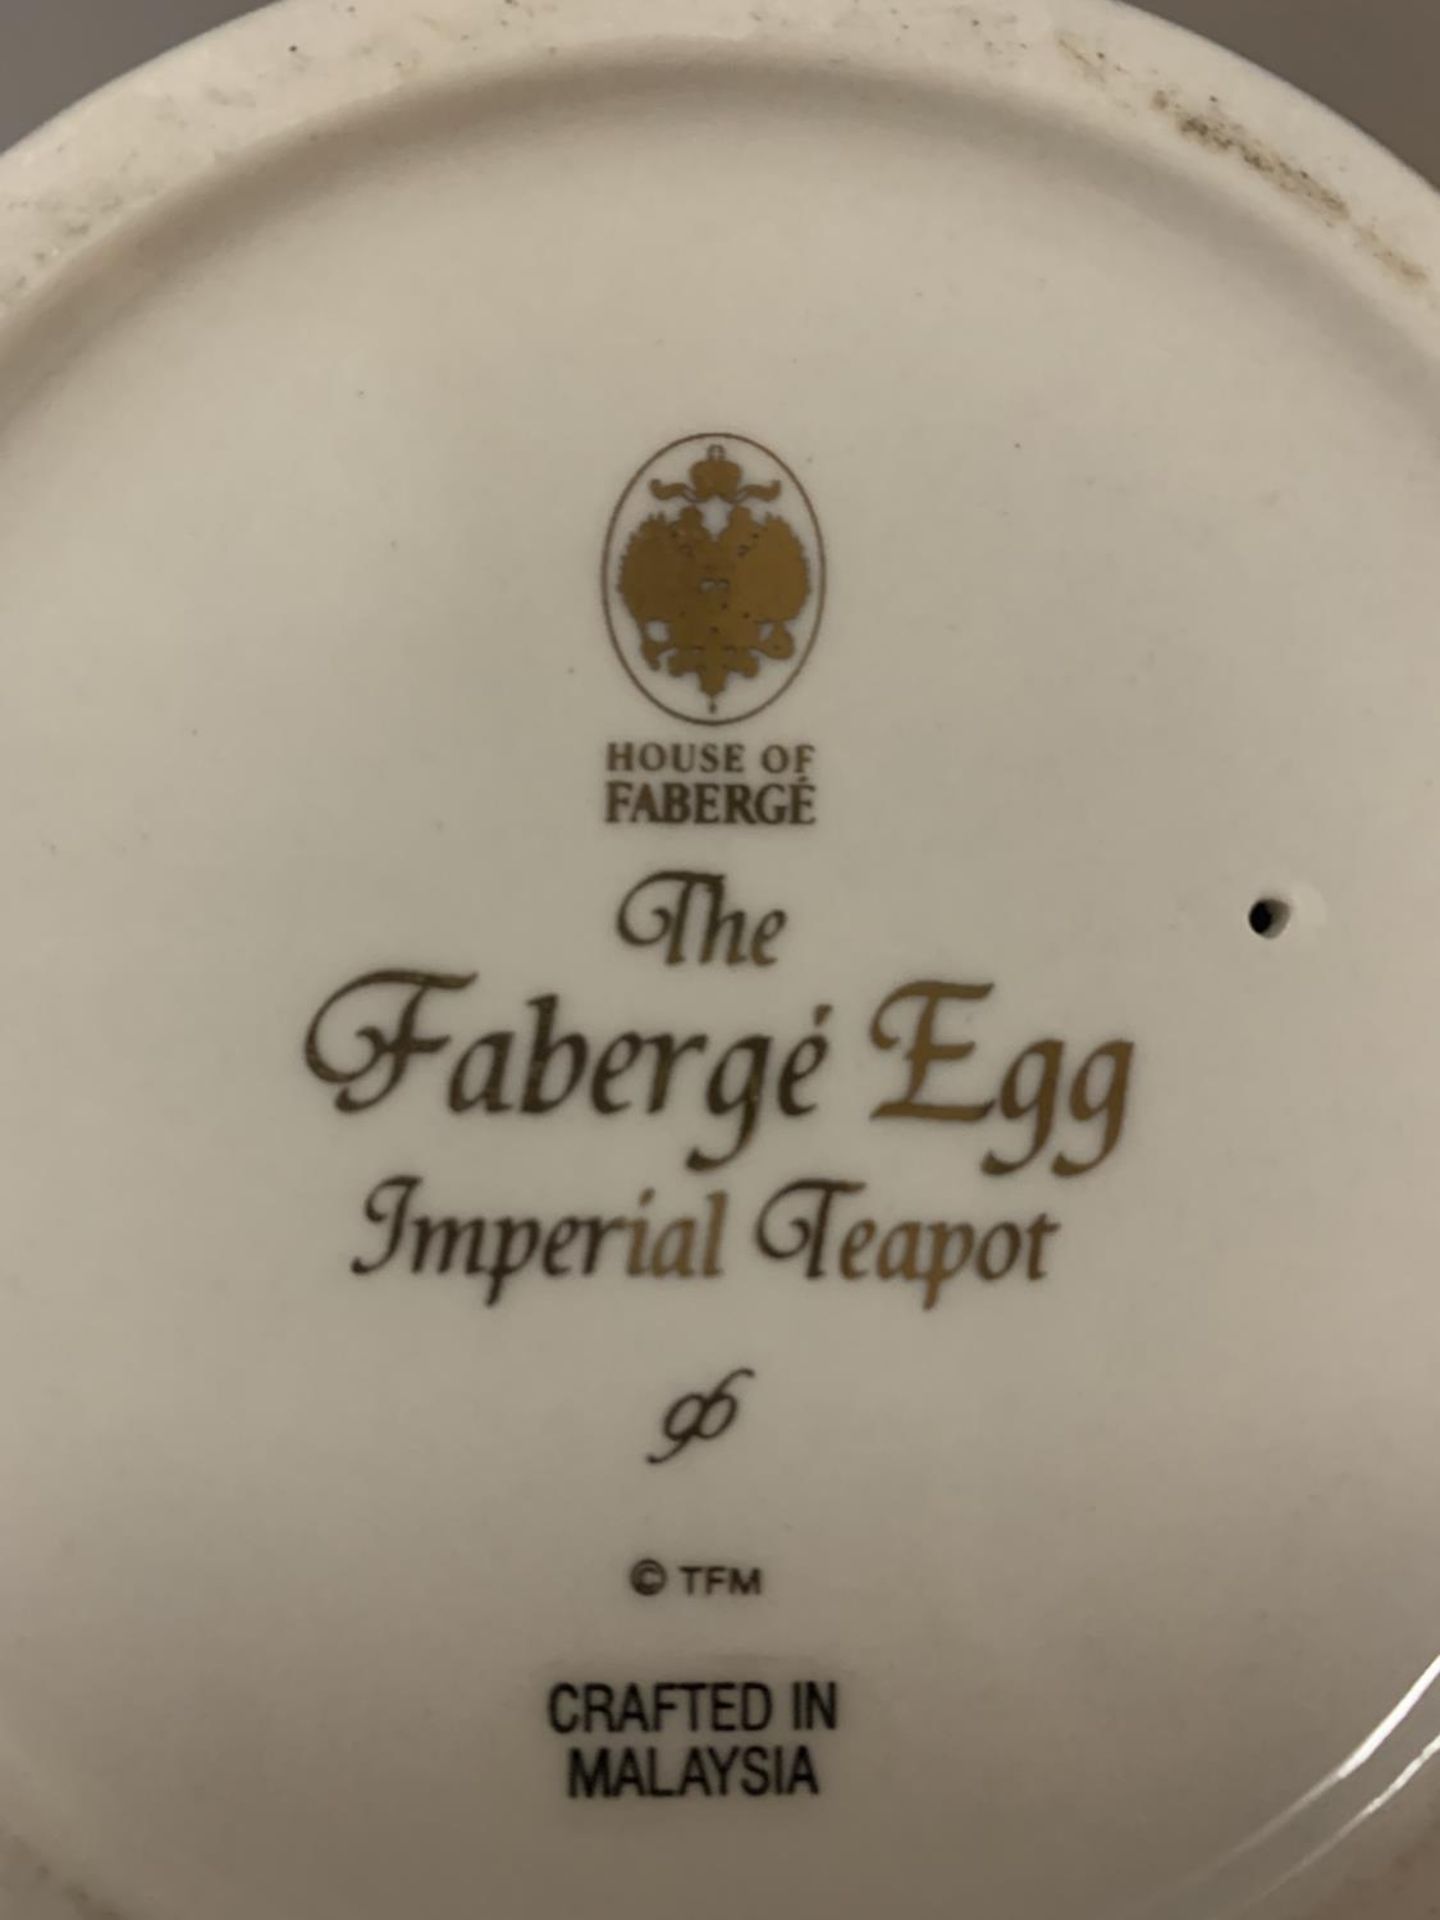 A FABERGE IMPERIAL TEAPOT WITH CERTIFICATE OF AUTHENTICITY - Image 6 of 7